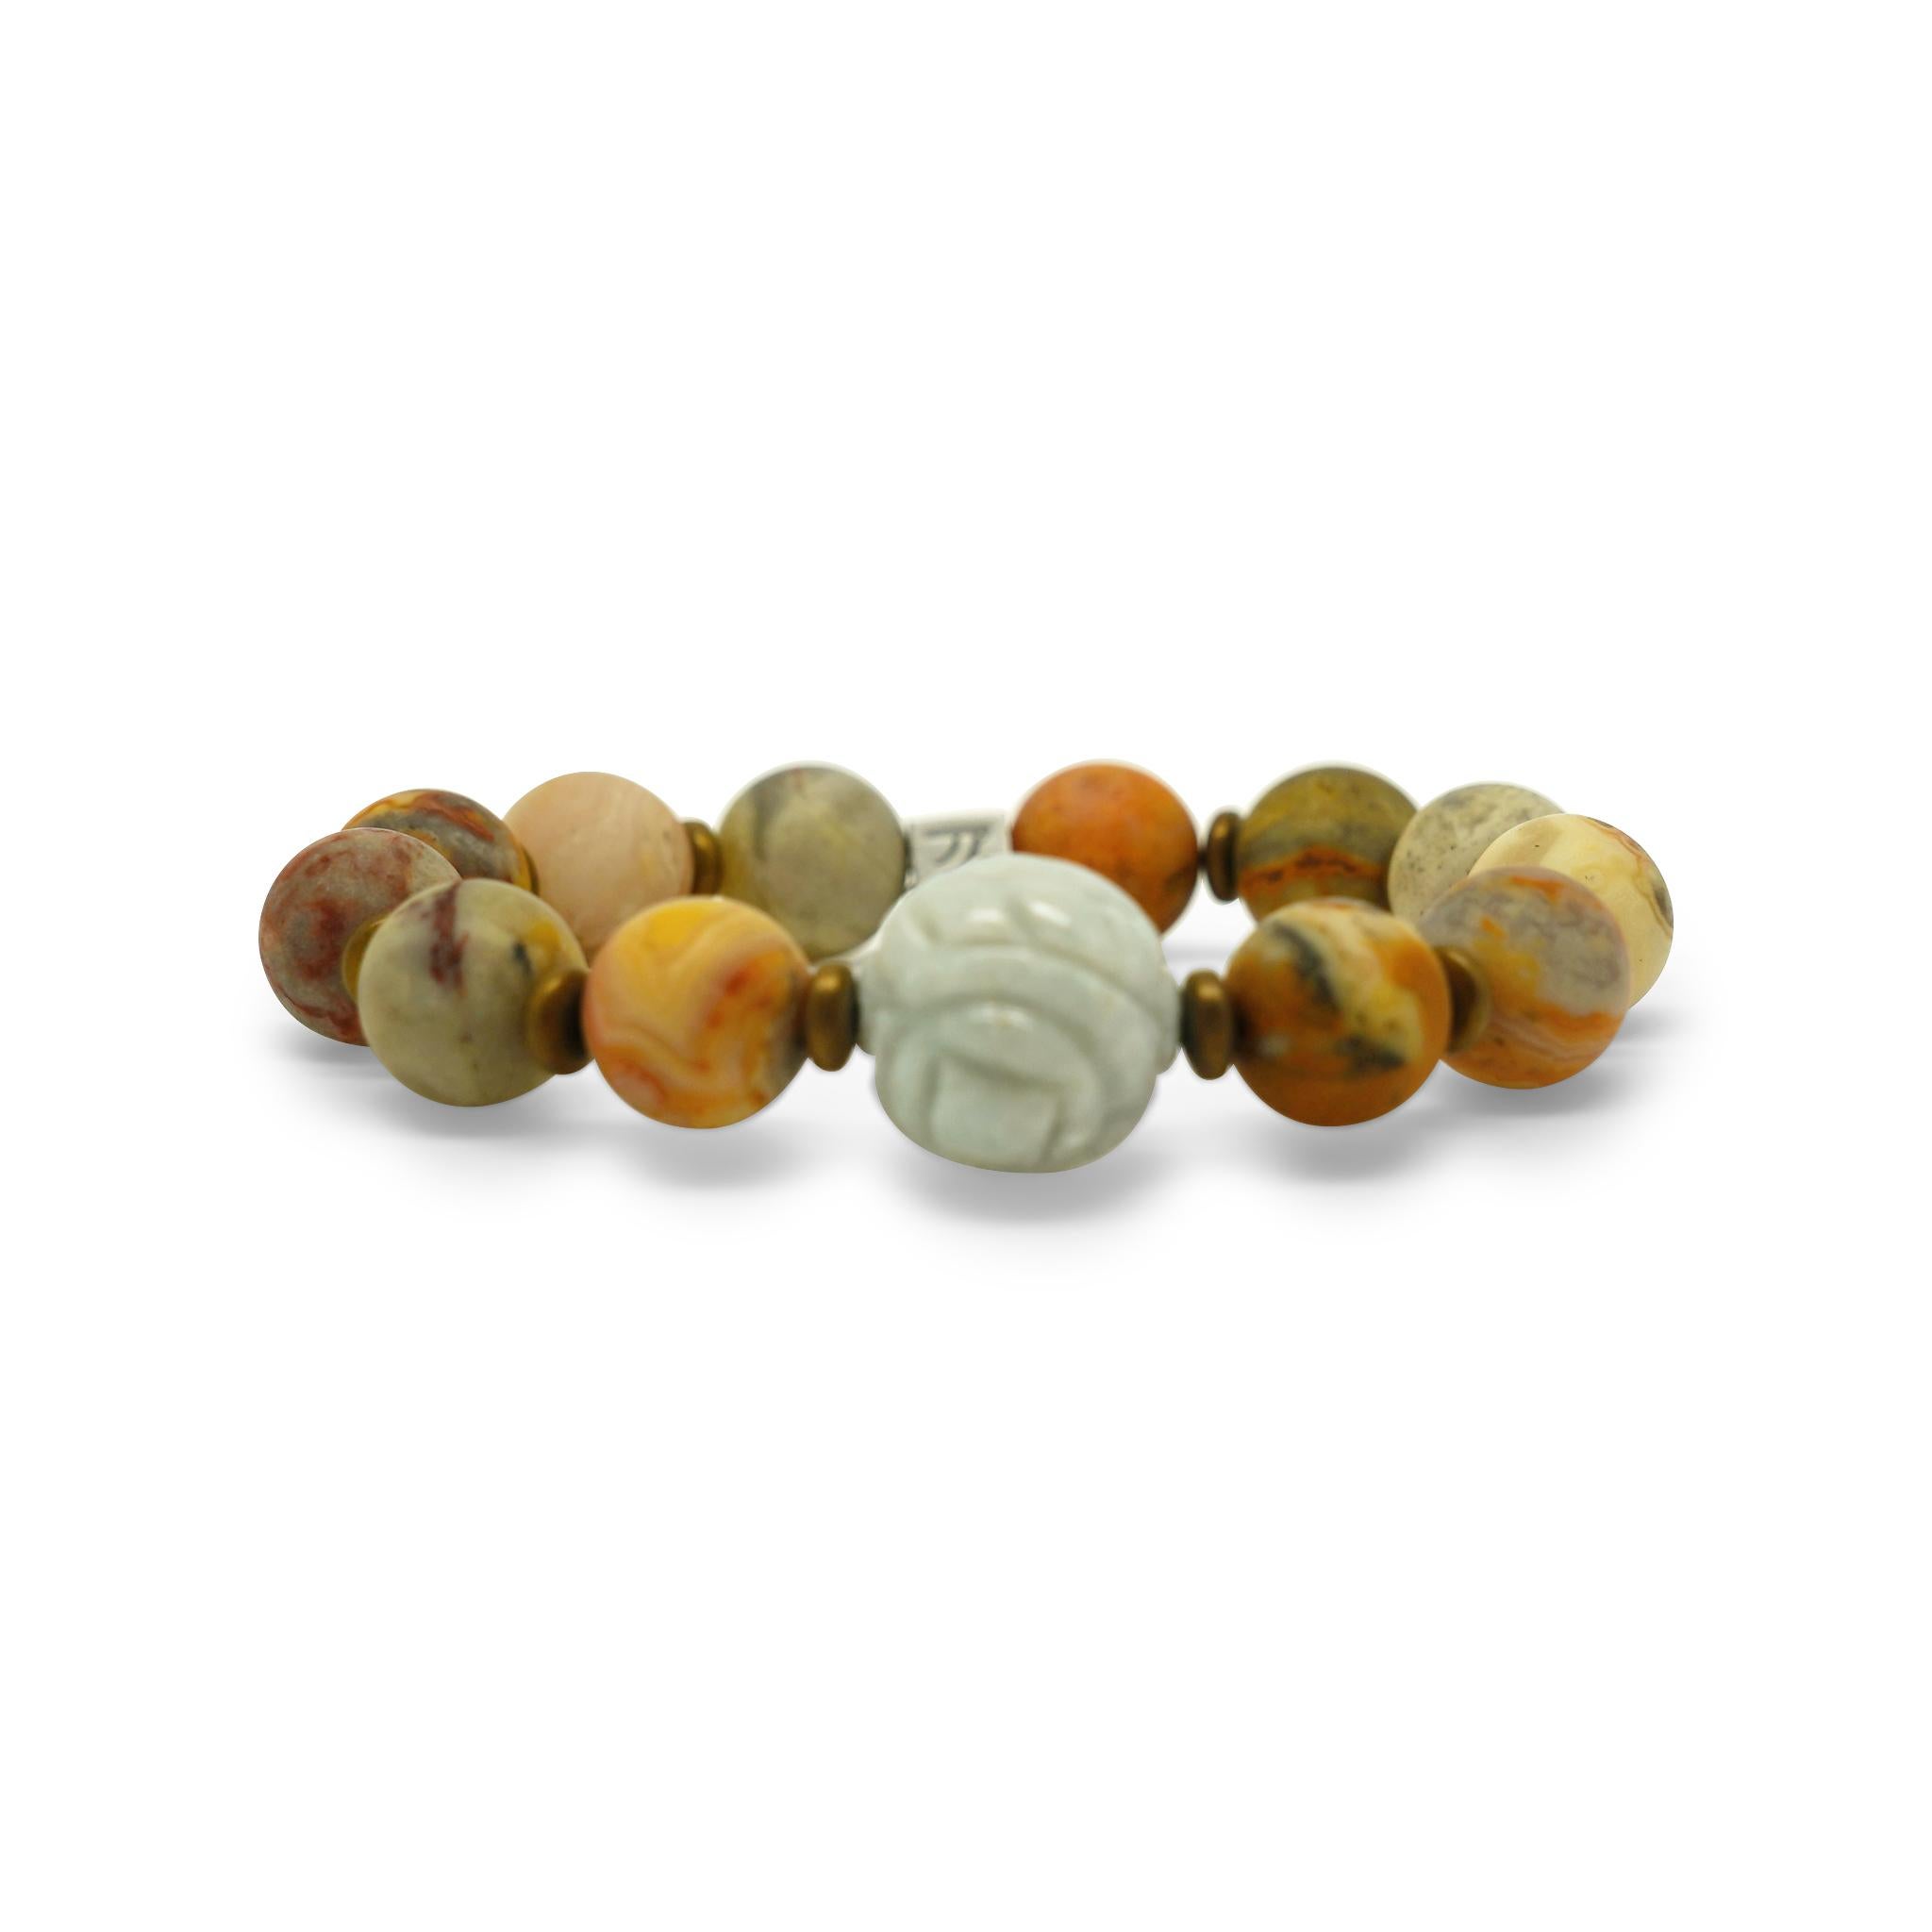 Behind the Jewelry
The beautiful carved Burmese Jade center piece adds an exquisite style to this Picture Jasper bracelet. Jade has a rich history in the Orient, especially China . Historically, the term jade was applied to any of a number of